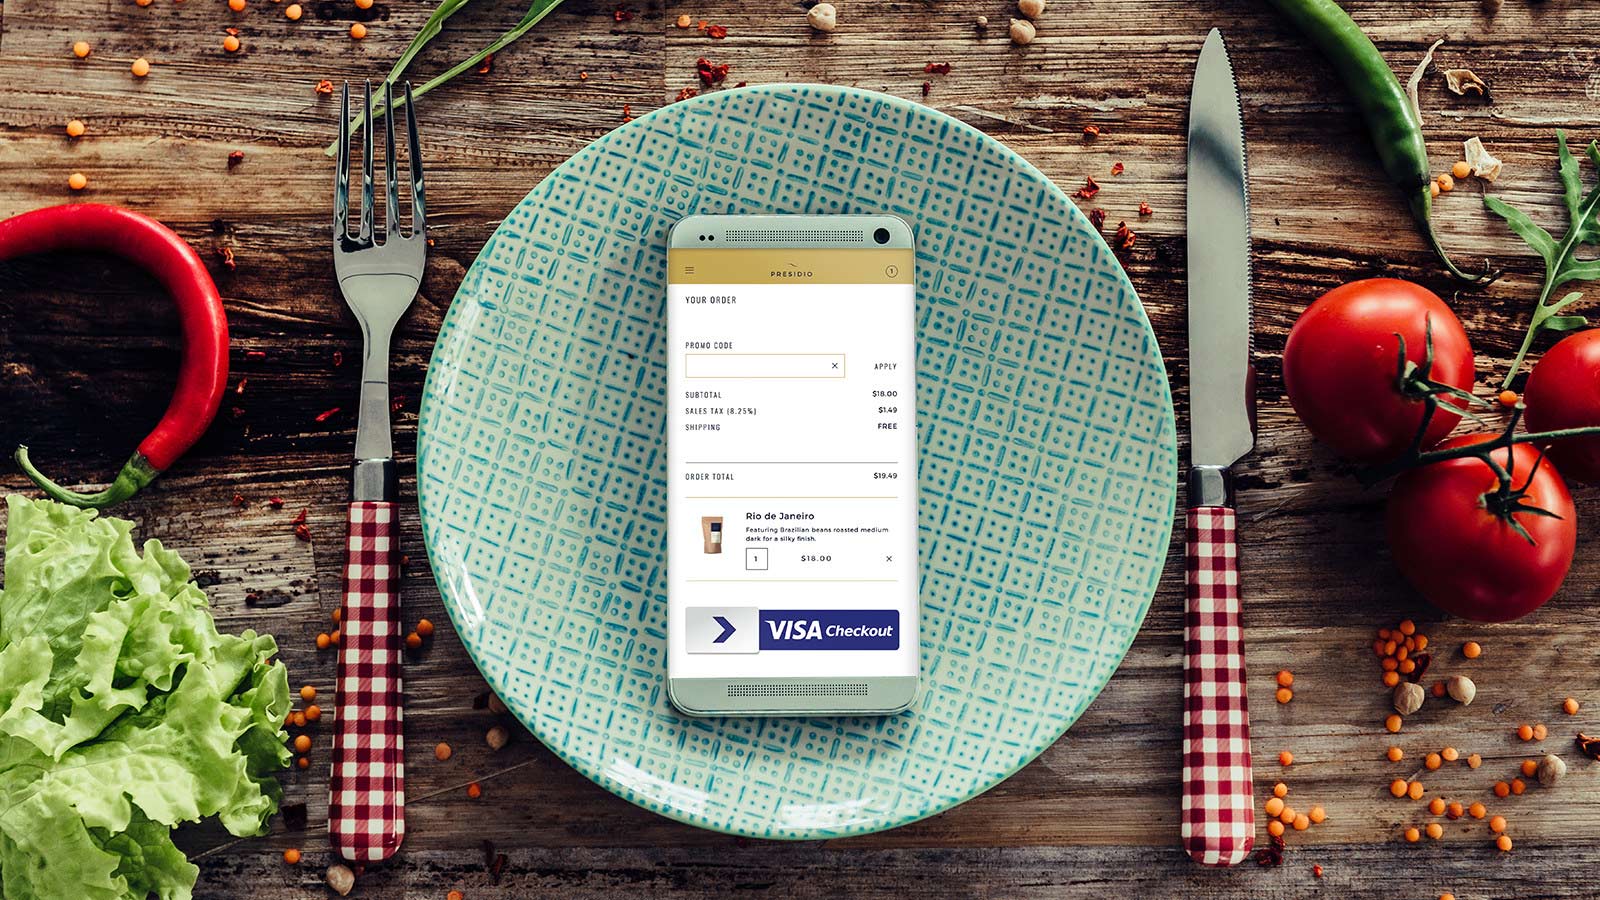 Mobile phone on top of a plate with the Visa Checkout logo visible on screen.